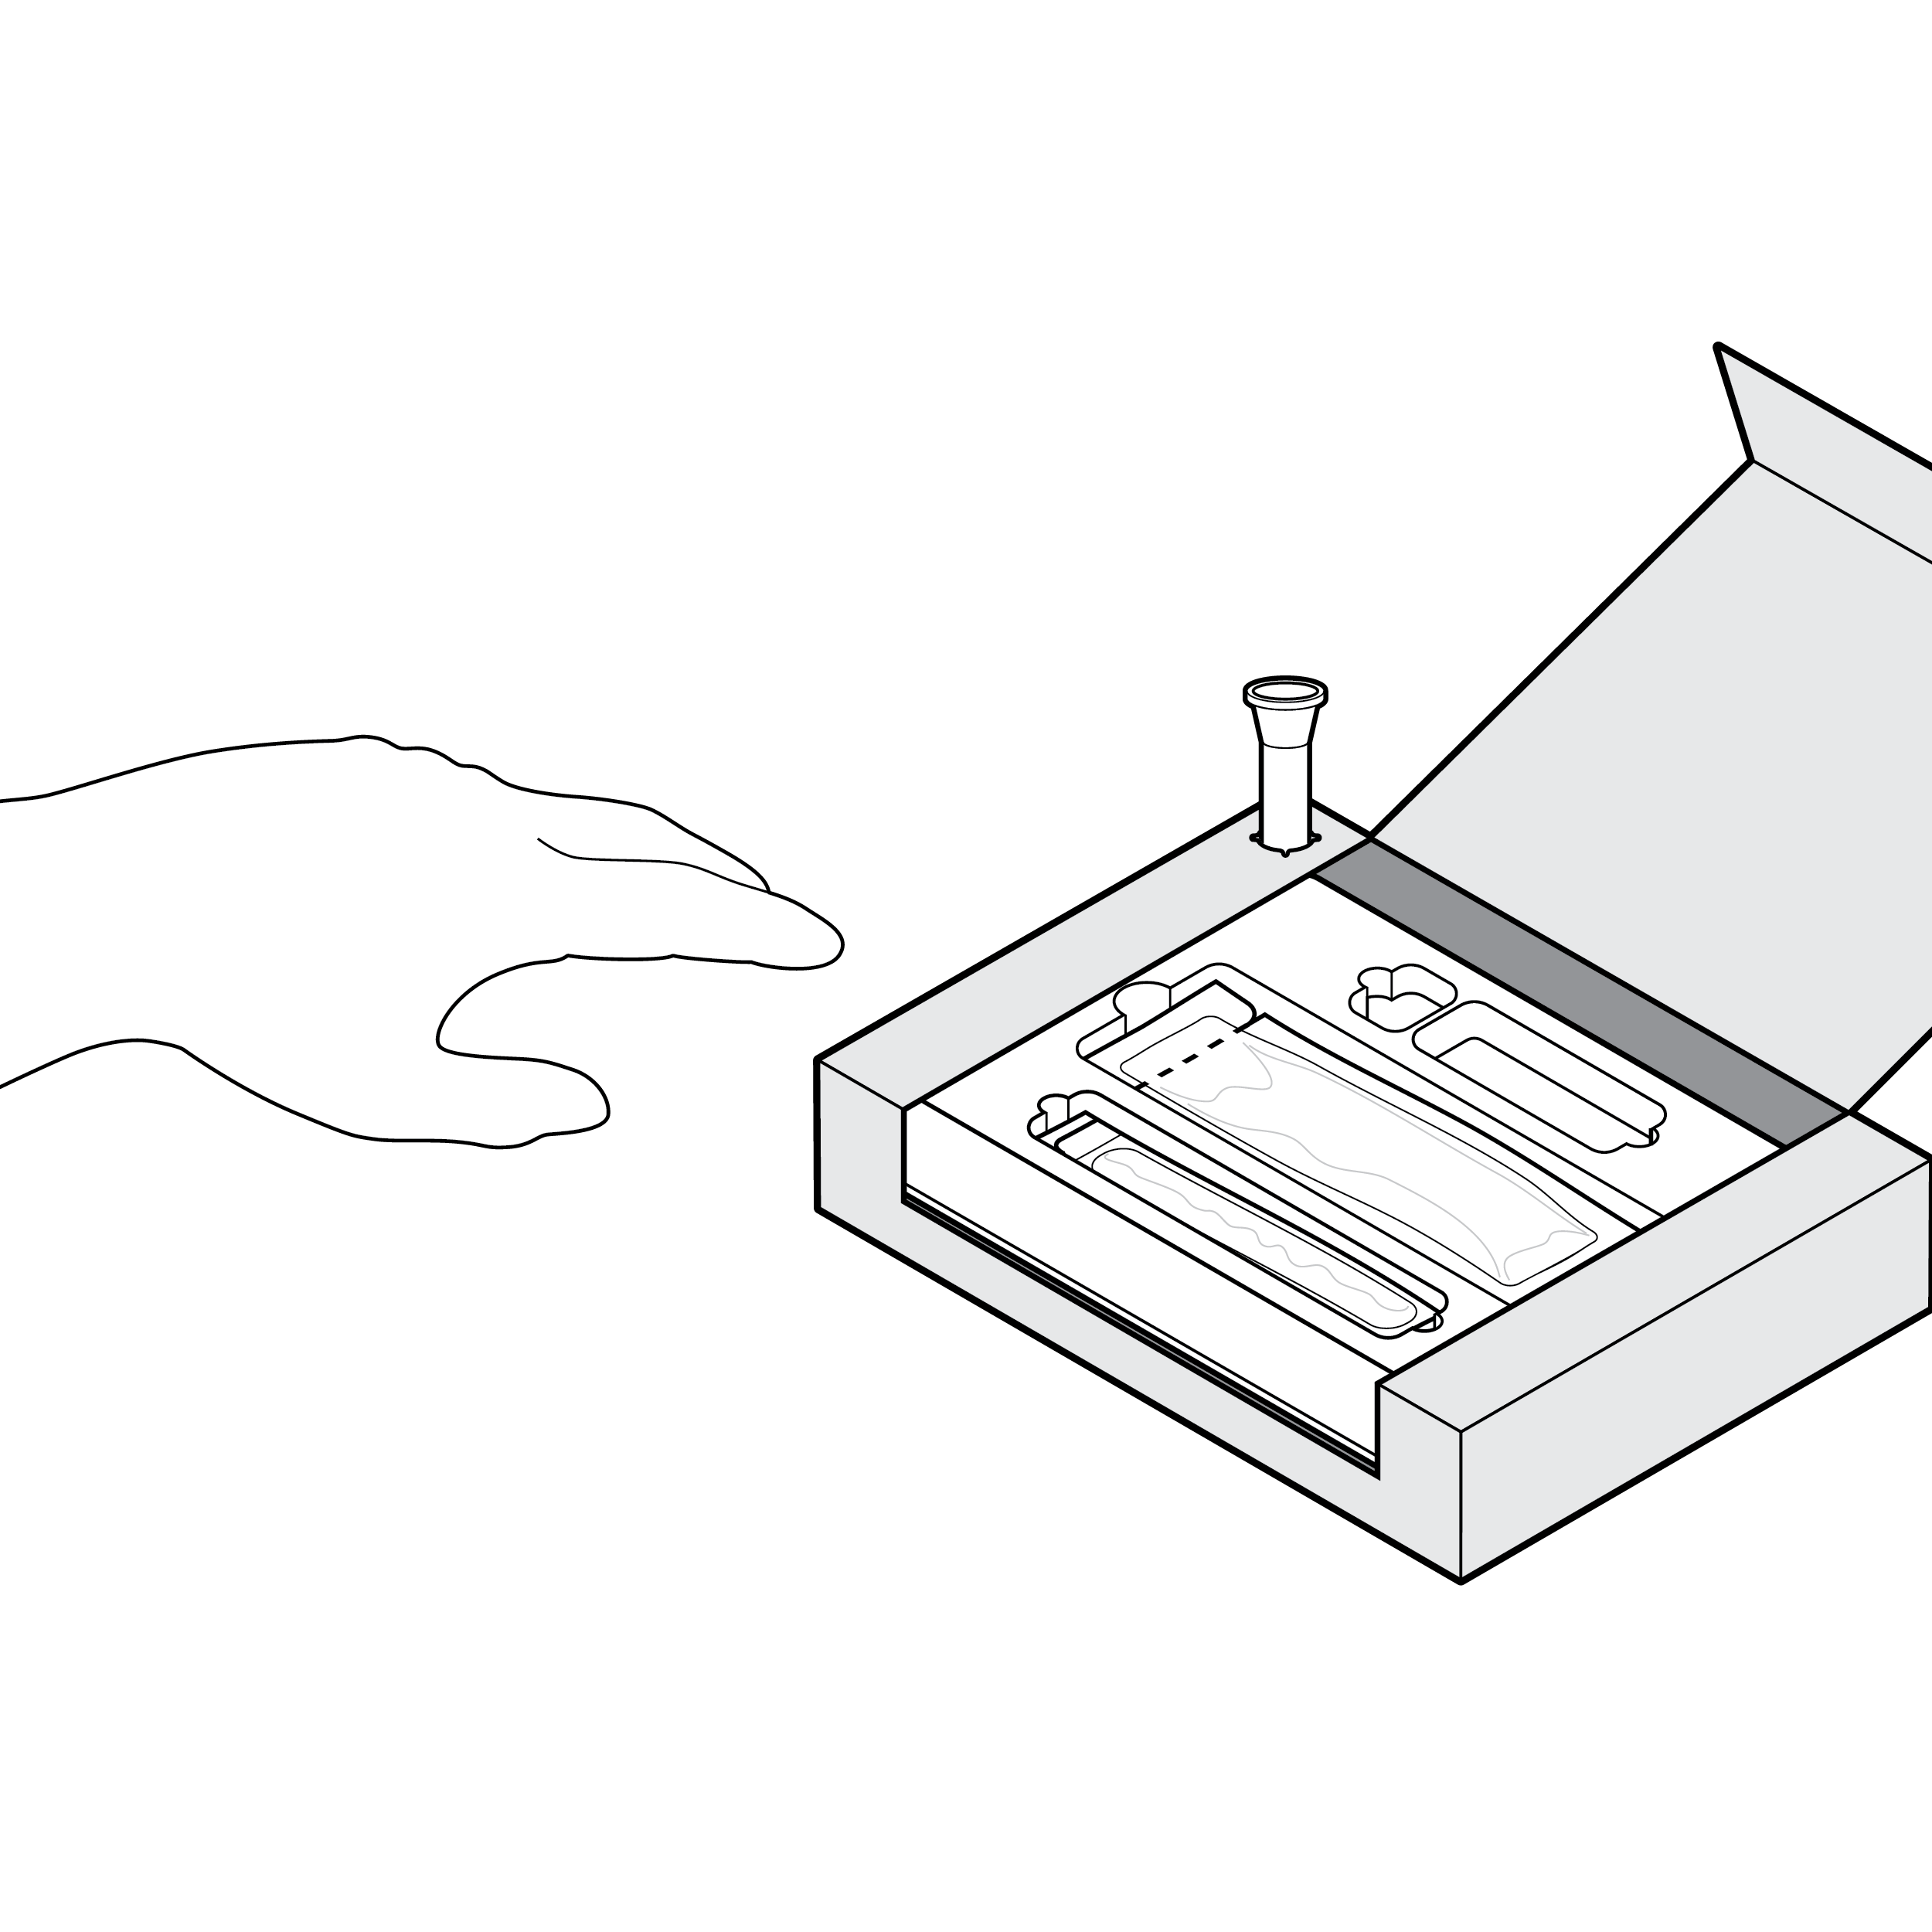 A package with fluid vial placed in back corner of box. The box has a tray with other components placed inside. A hand is reaching toward the tray components. The vial is suitably placed so it will not be backtracked over during the workflow.